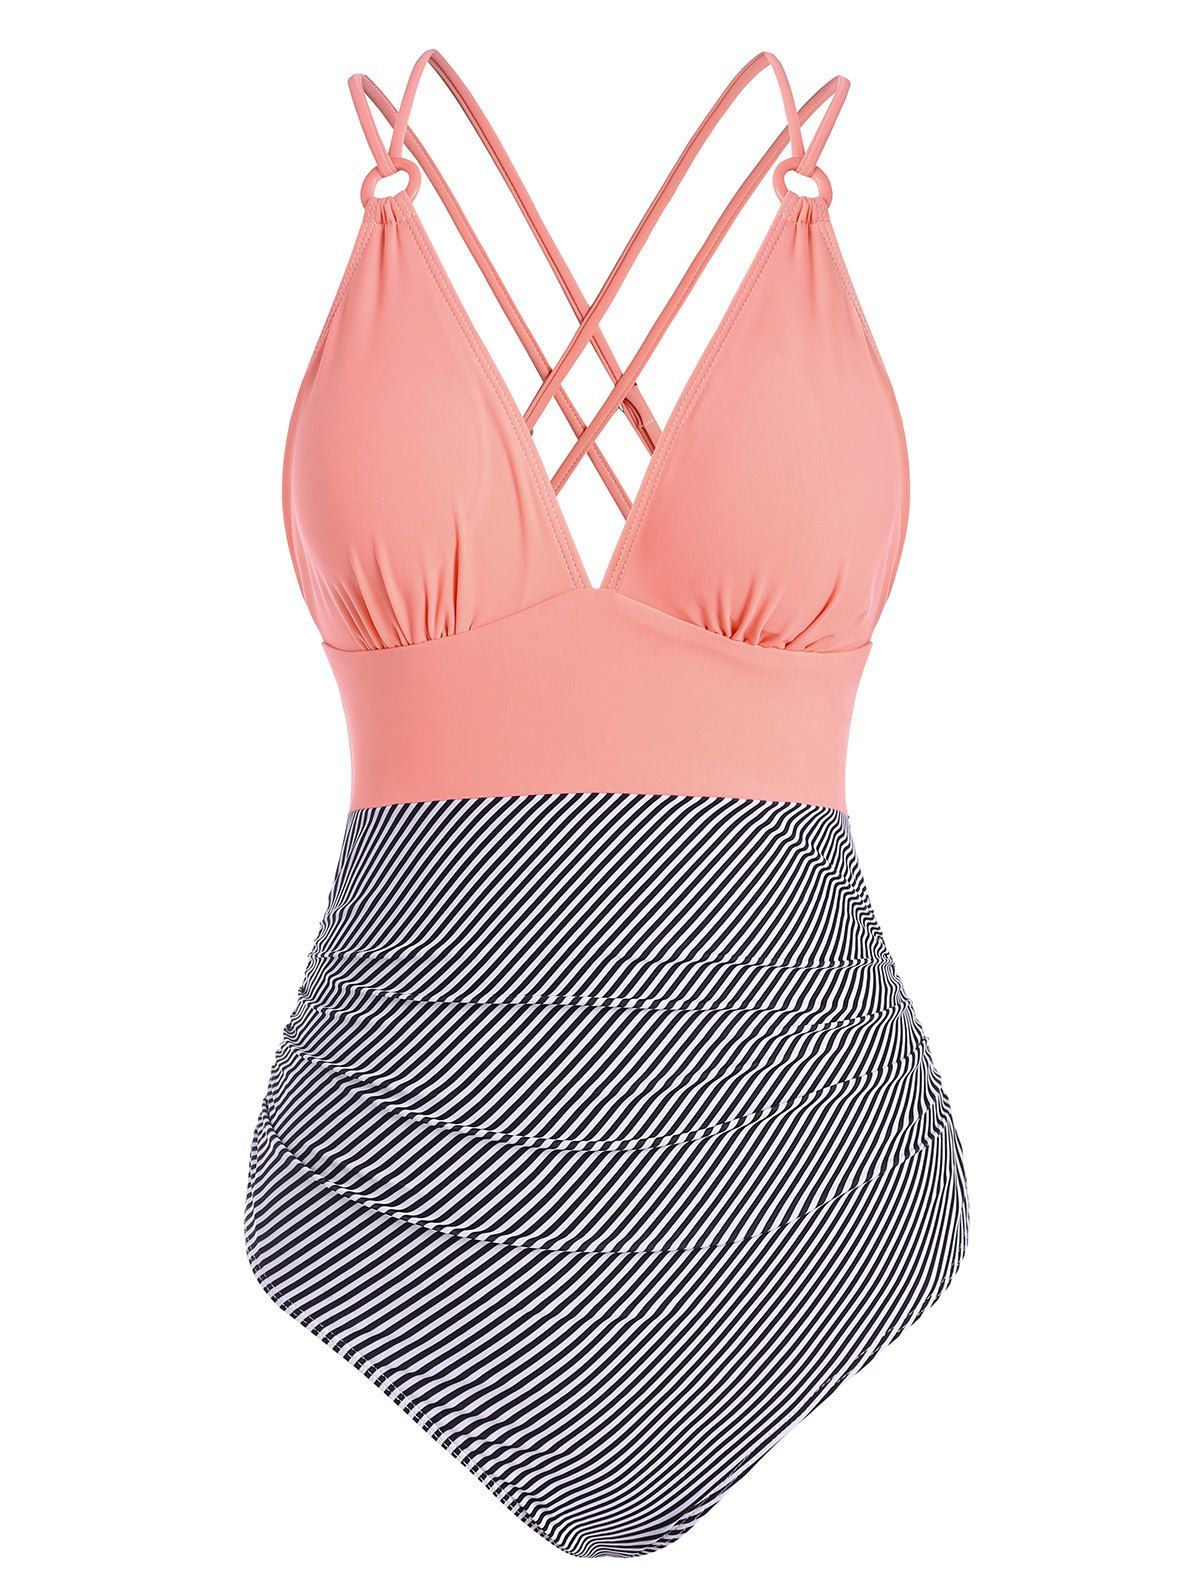 Striped Ruched Crisscross Back One-piece Swimsuit - LIGHT PINK M